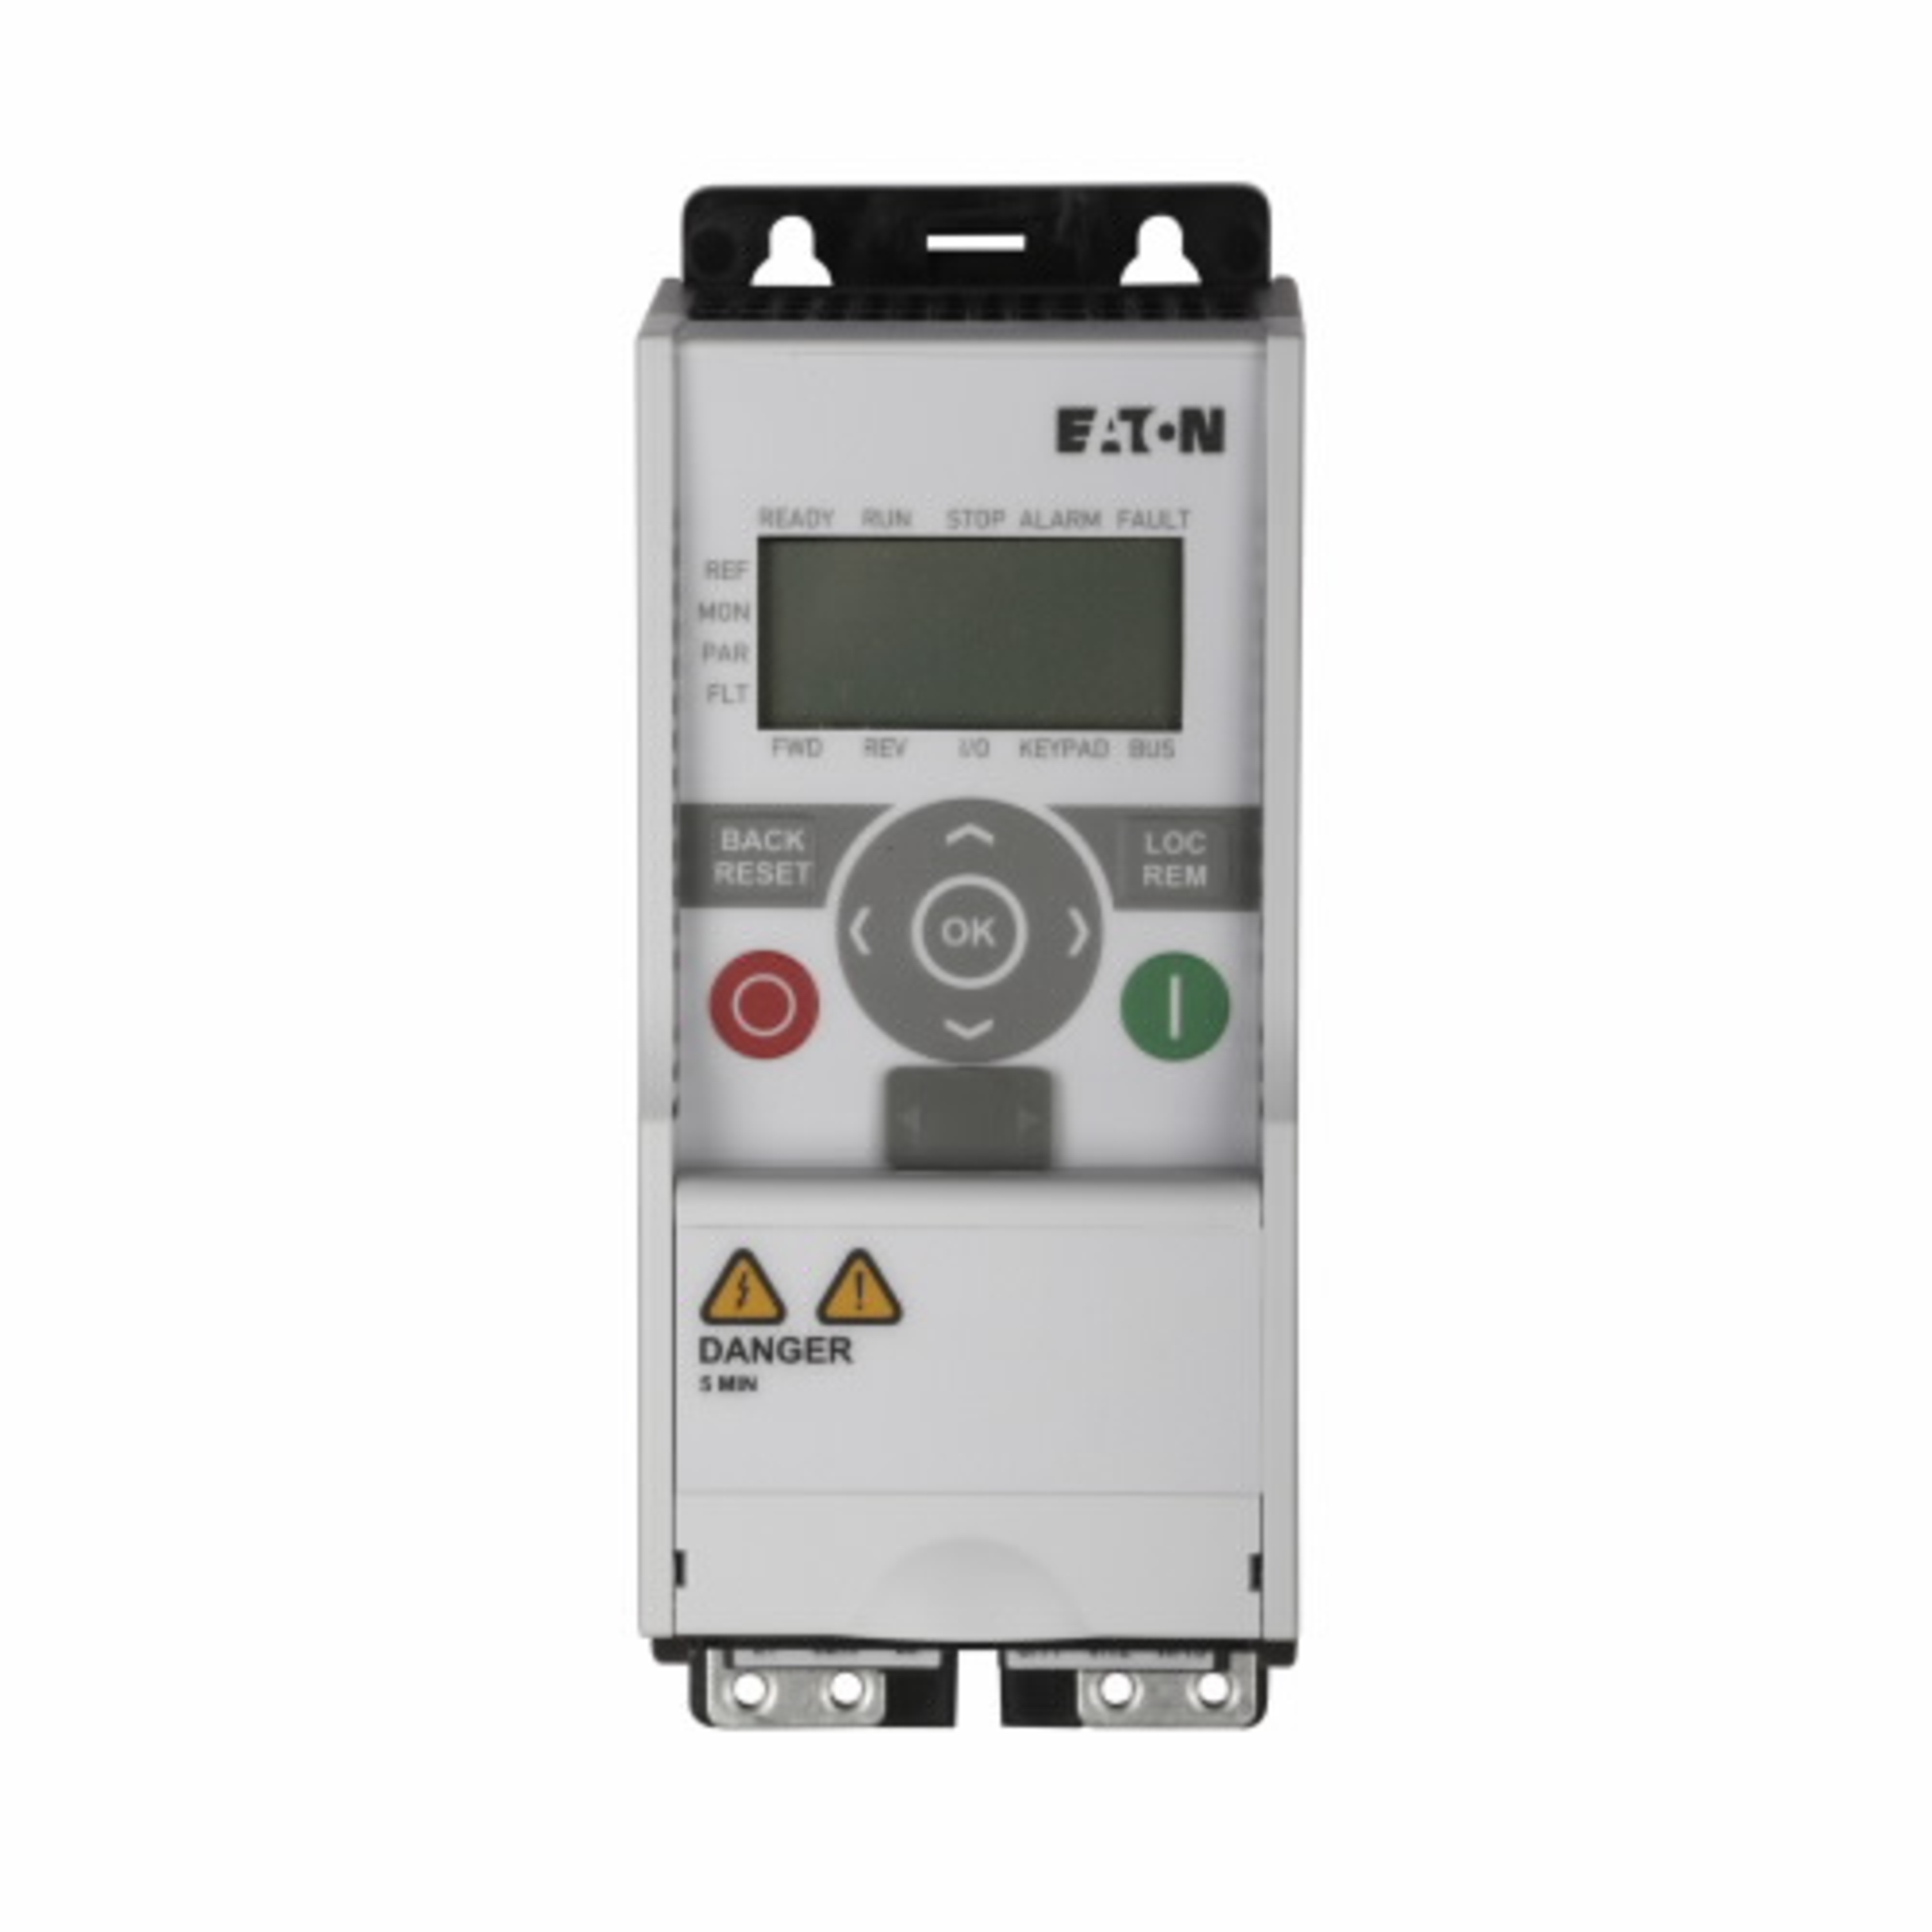 Eaton MMX12AA7D0N0-0 Eaton | Cutler Hammer MMX12AA7D0N0-0  Variable Frequency Drives AC Drives – 240VAC – 1 Phase https://gesrepair.com/wp-content/uploads/2022/Eaton/Images/Eaton_MMX12AA7D0N0-0_Variable_Frequency_Drive.jpg